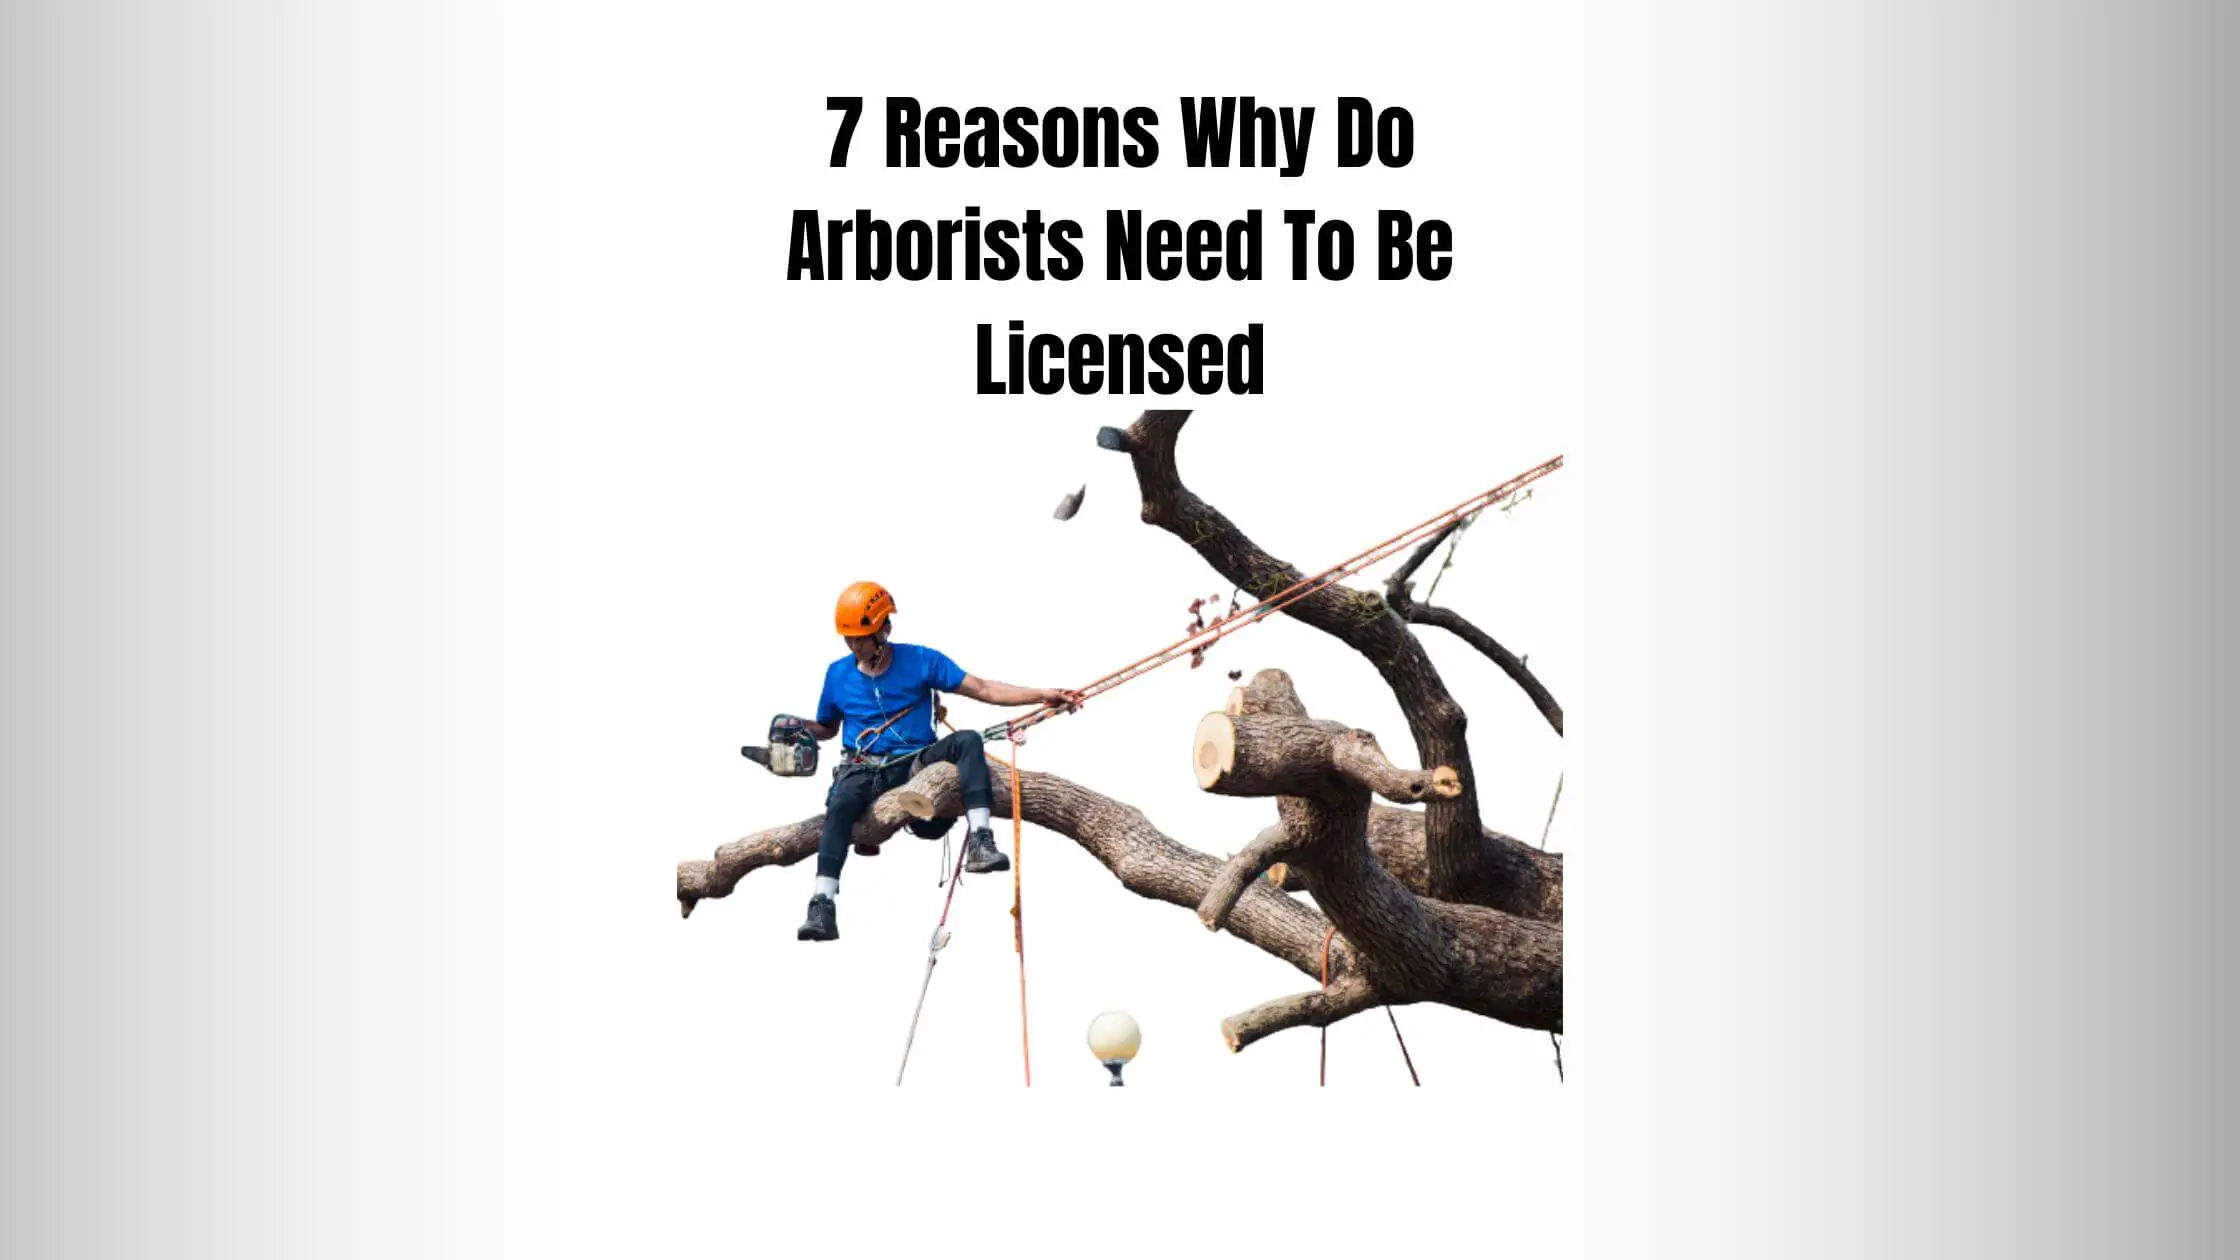 7 Reasons Why Do Arborists Need To Be Licensed